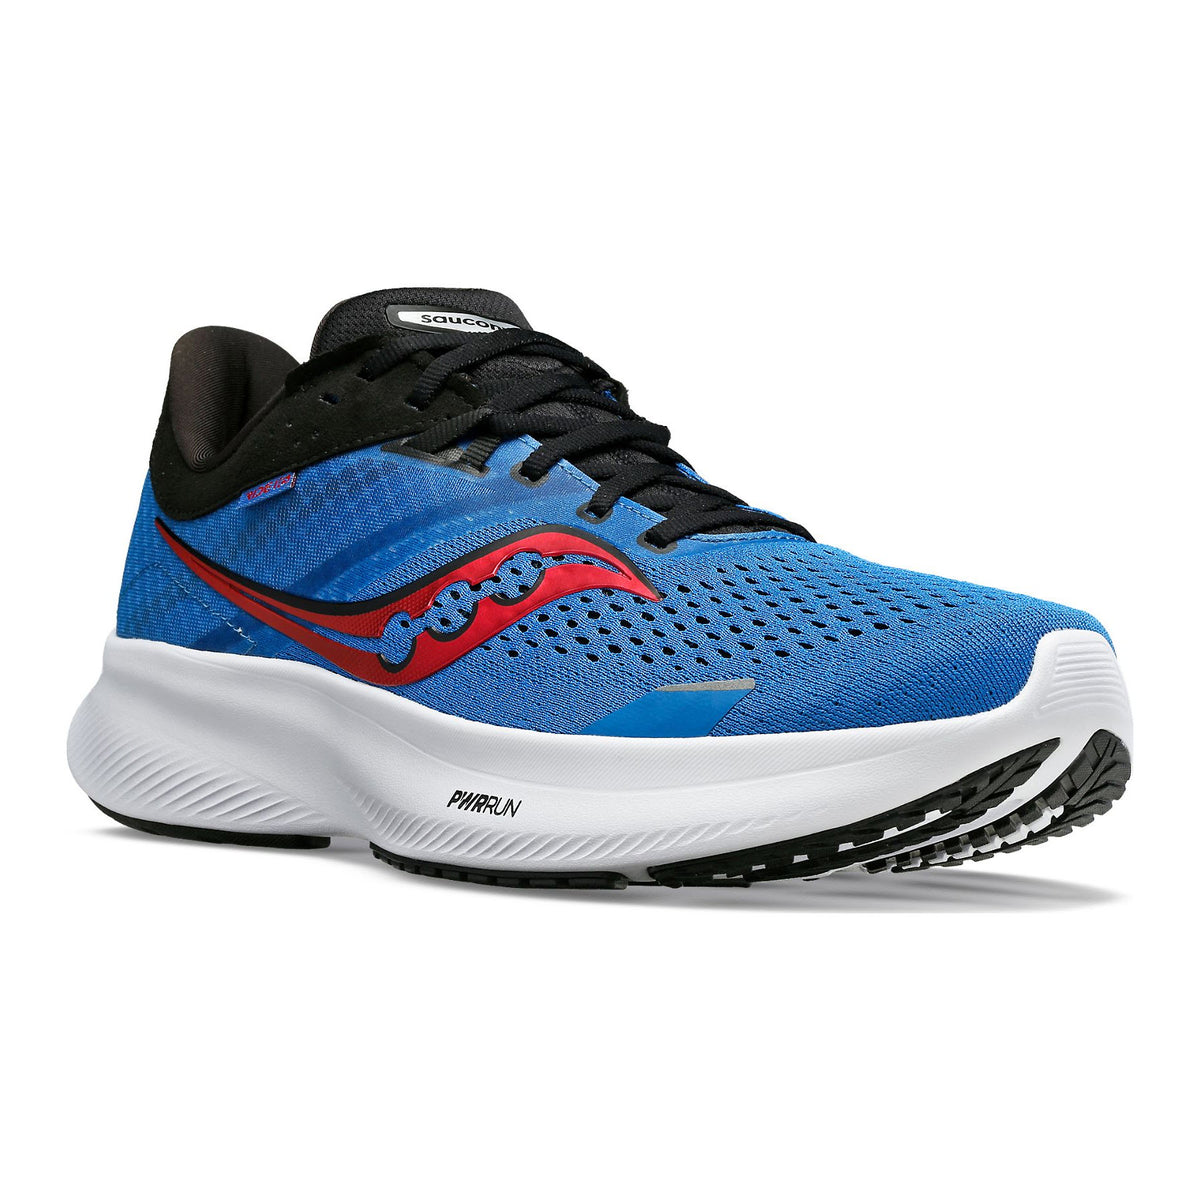 Blue and red Saucony Ride 16 Hydro/Black running shoe with a white sole and black interior, displayed against a white background.